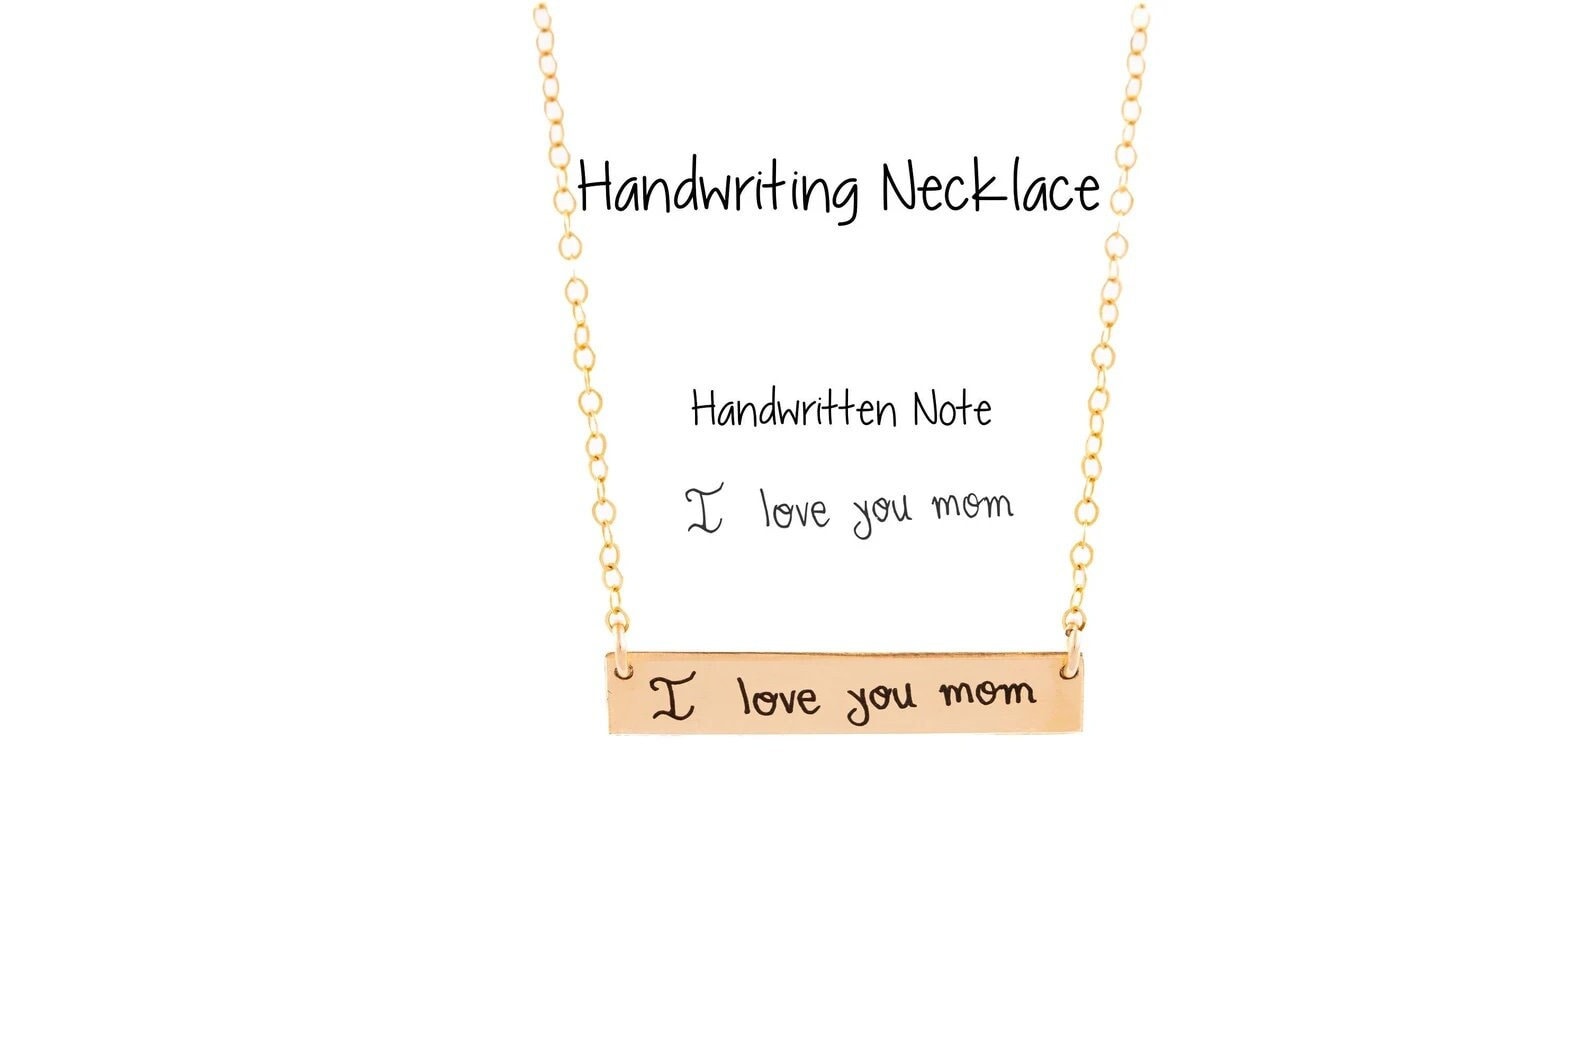 Handwriting Necklace,  Personalized Bar Necklace, Handwriting Jewelry,  hand writing memorial necklace, handwriting gifts, Christmas Present